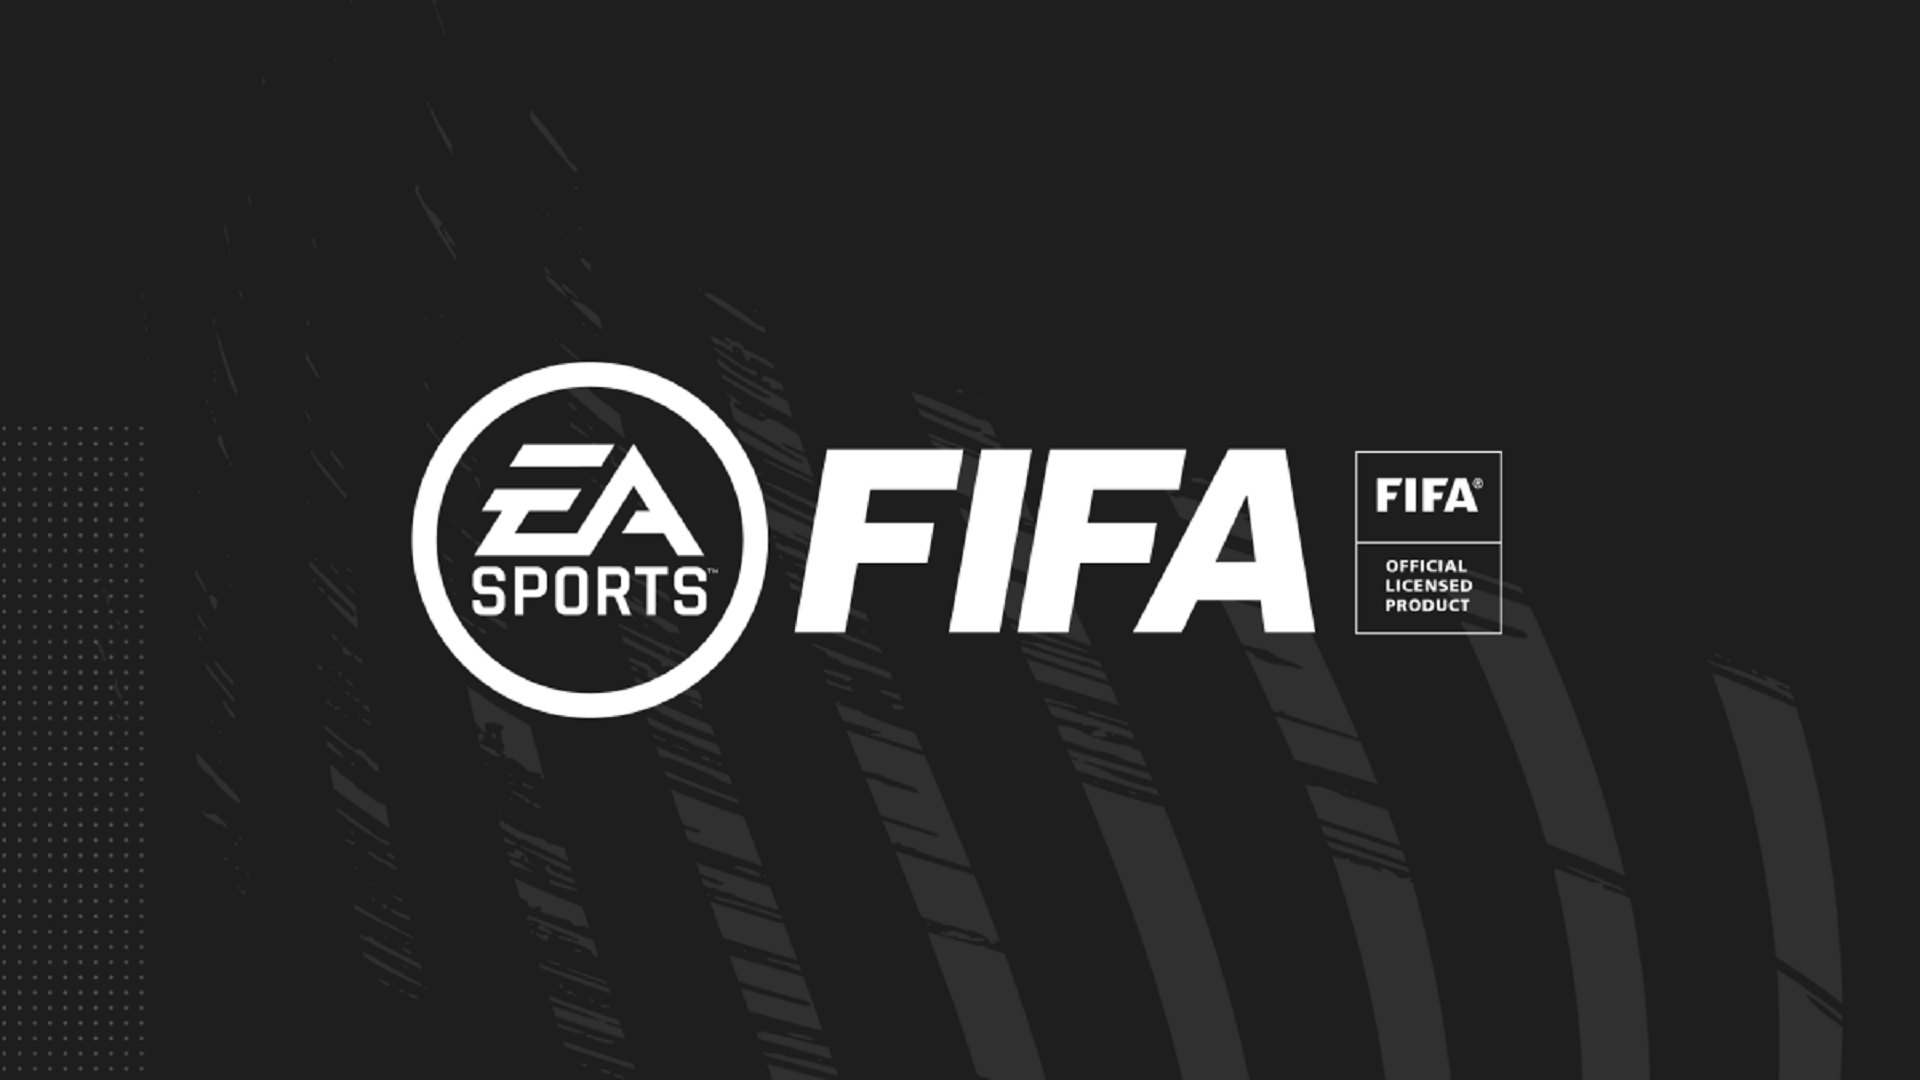 FIFA 23 brought an end to 29 years of FIFA games EA published